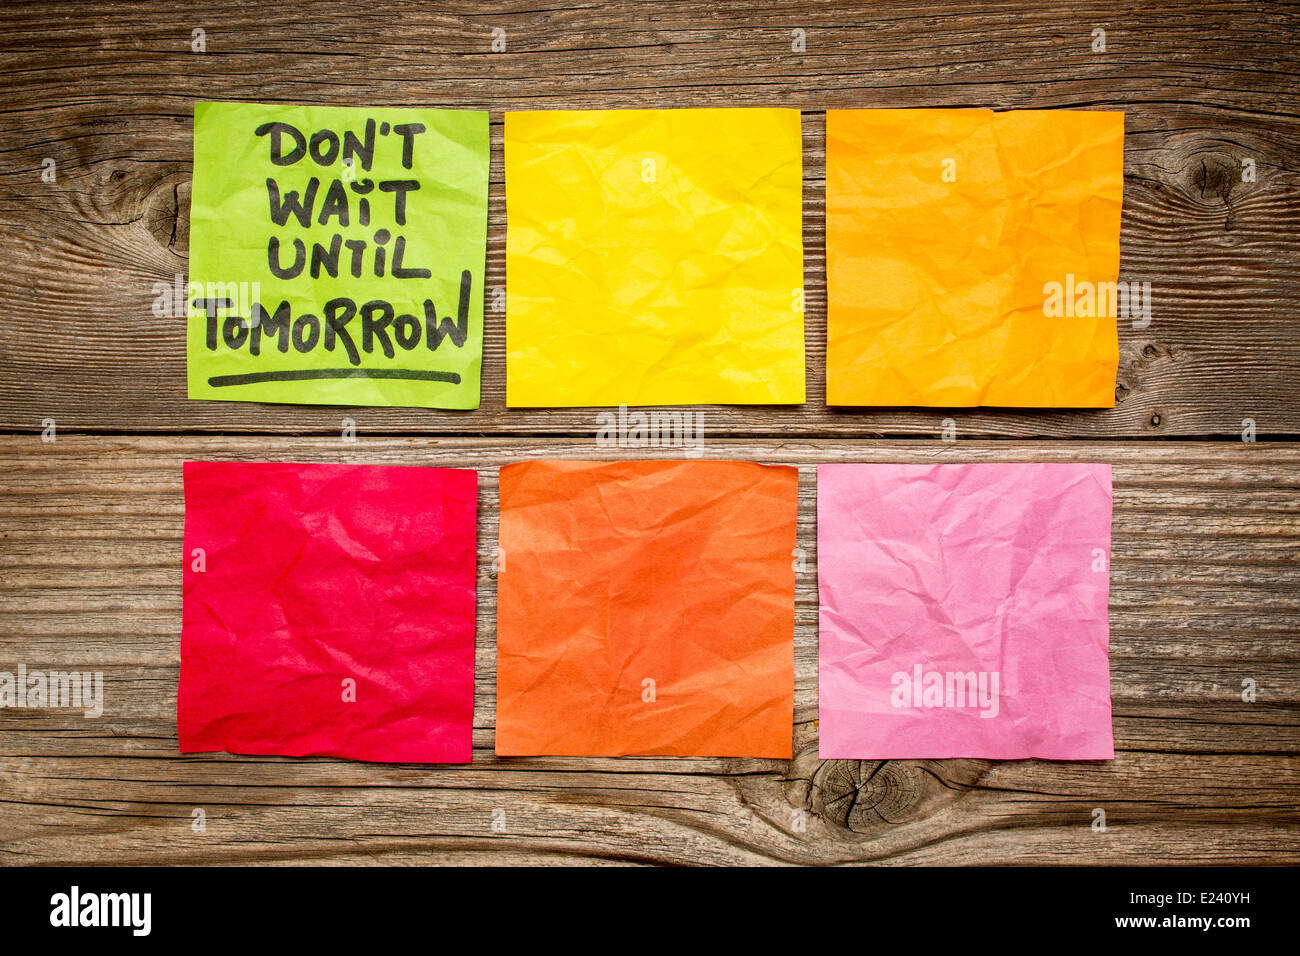 do not wait until tomorrow - motivational reminder - handwriting on sticky note against grained wood Stock Photo